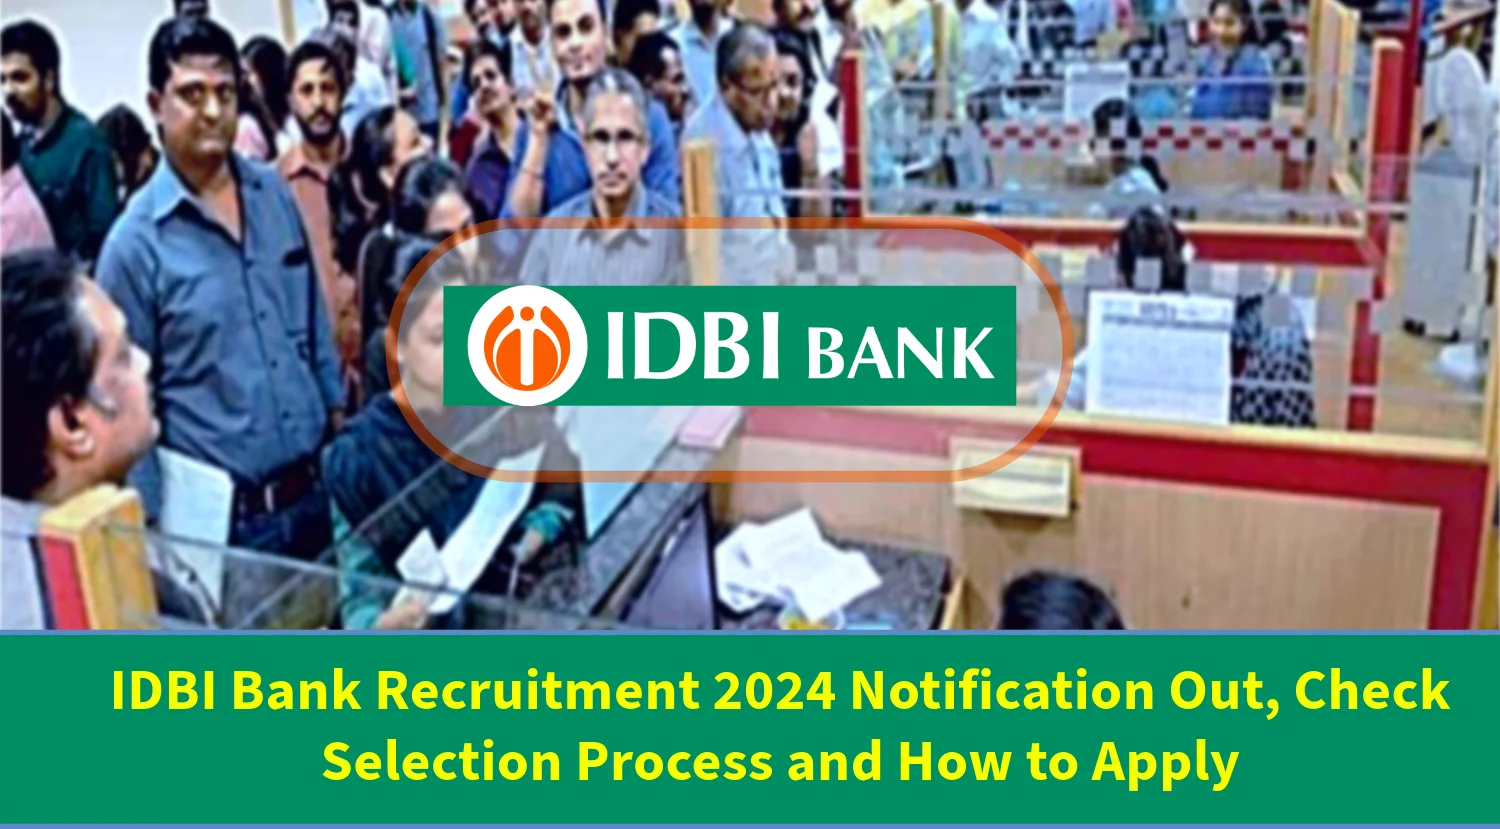 IDBI Bank Recruitment 2024 Notification Out, Check Selection Process and How to Apply